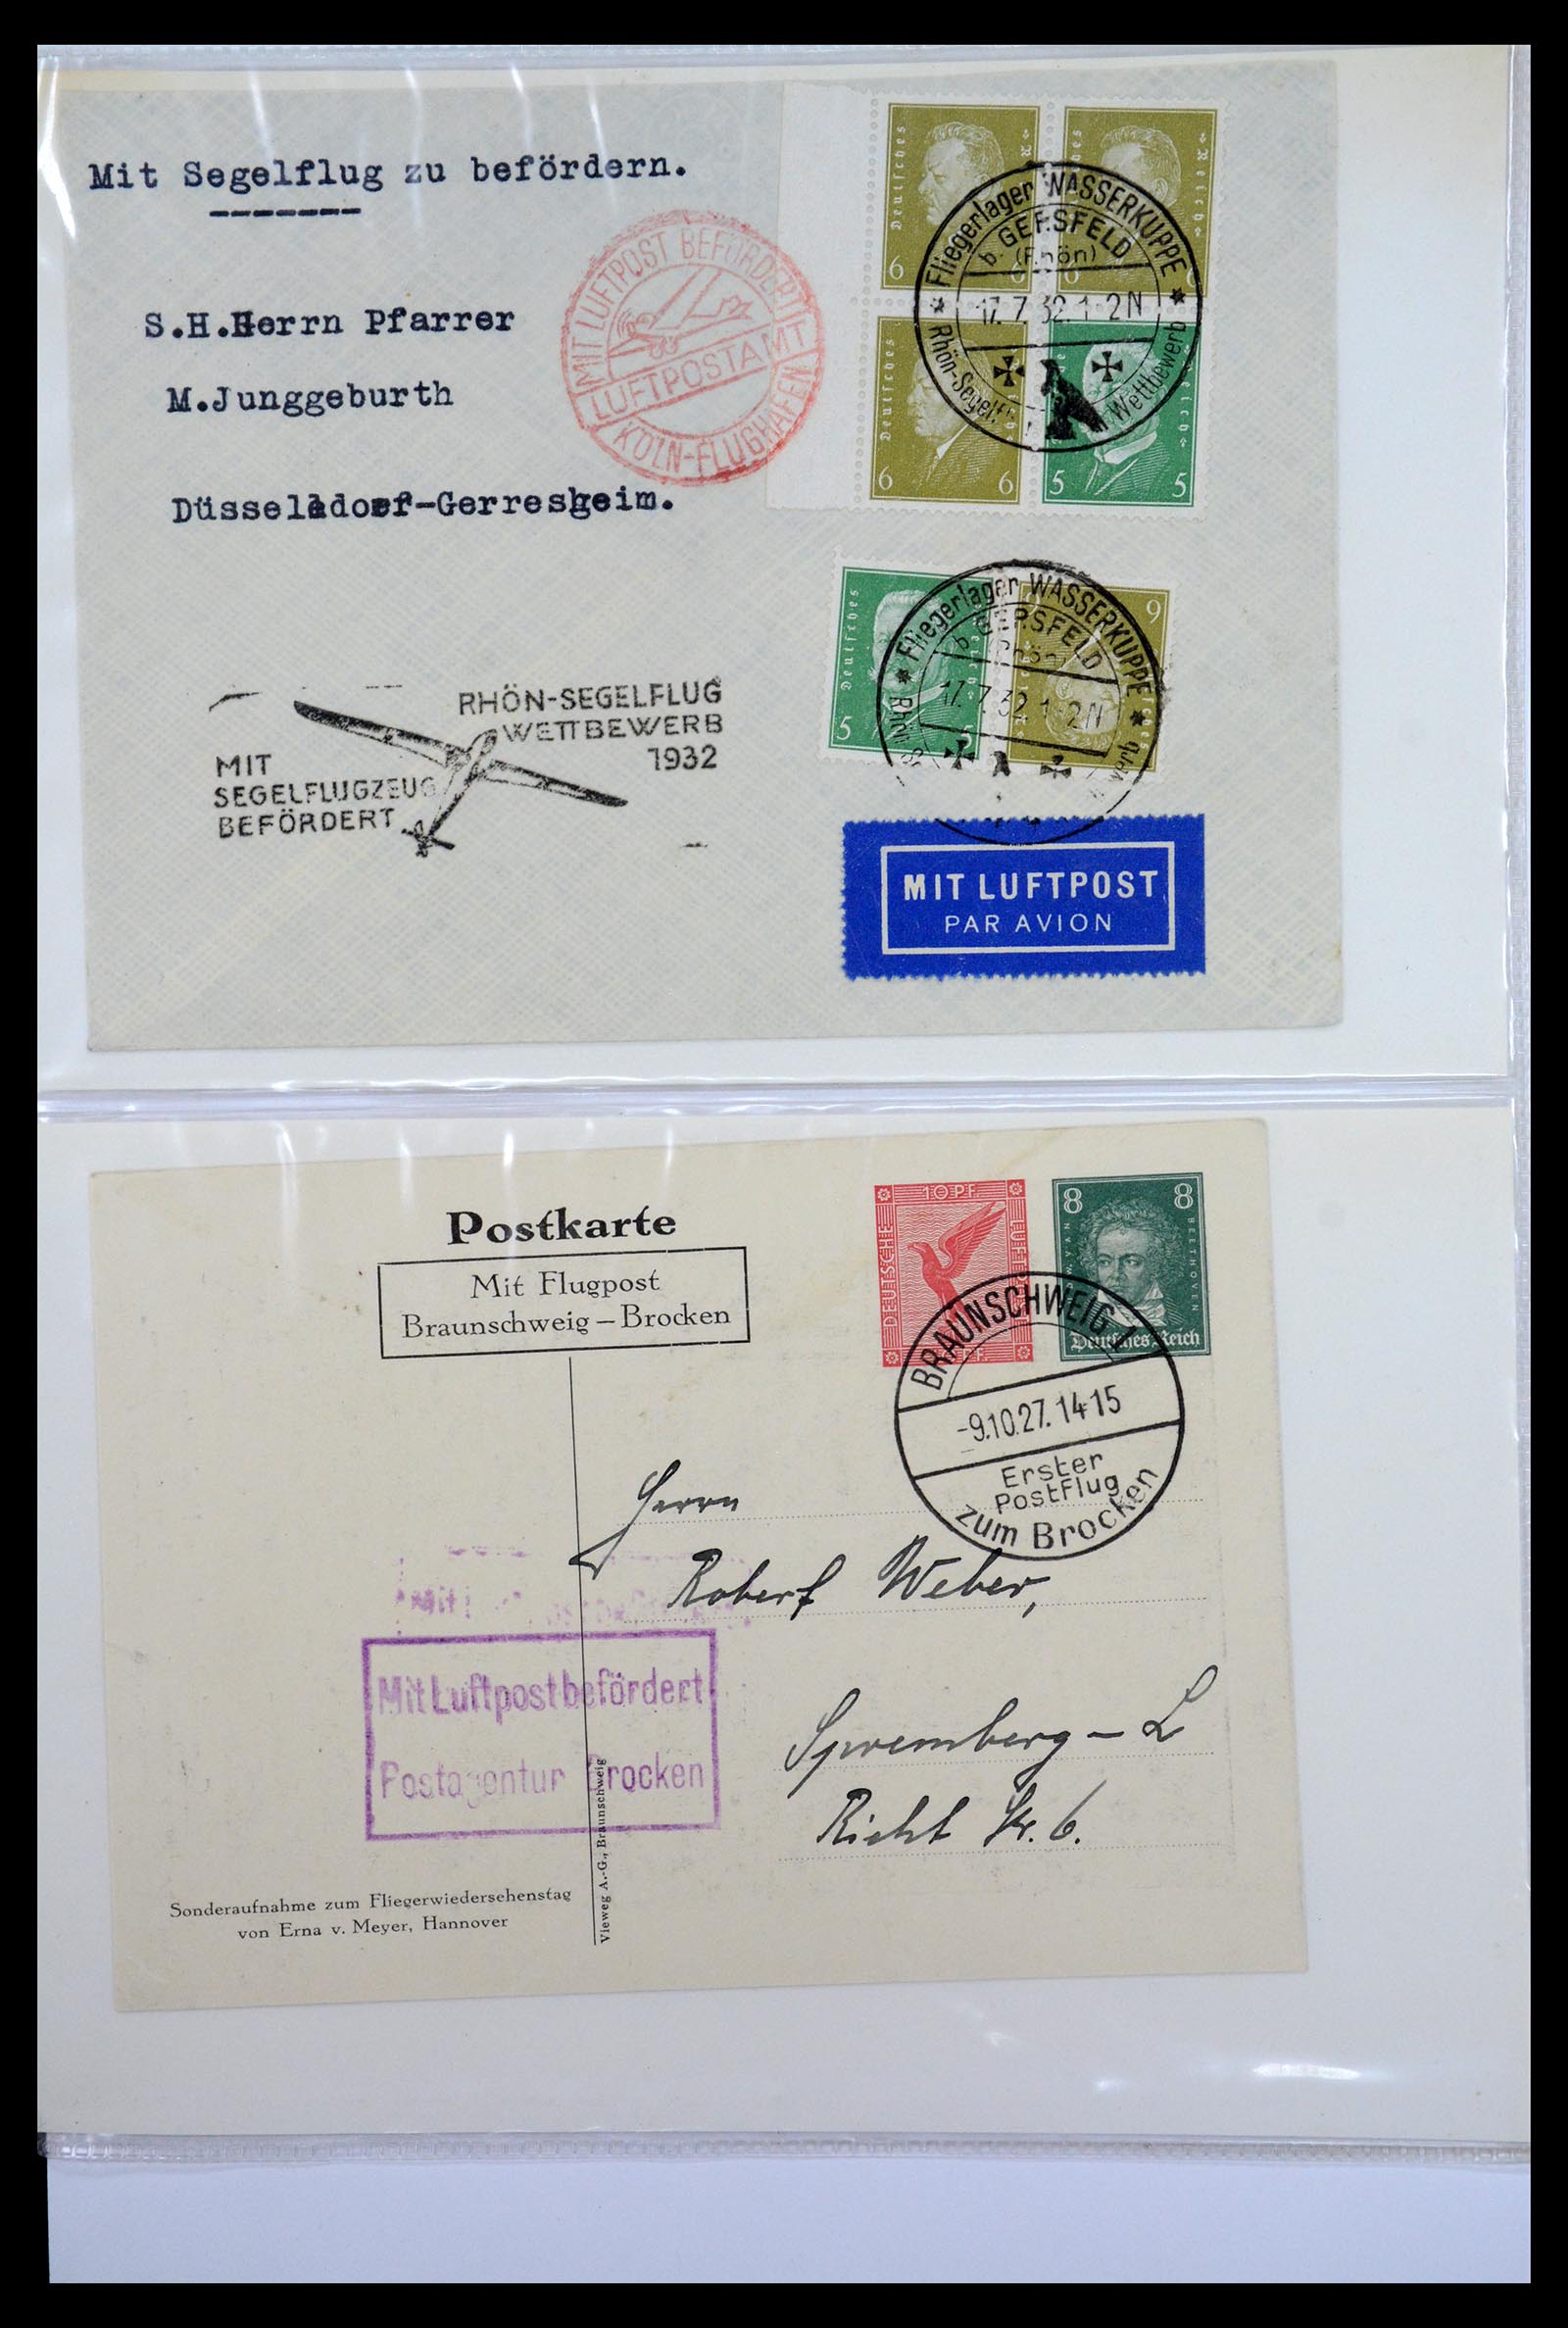 36009 017 - Stamp collection 36009 Airmail stamps and covers 1920-1940.